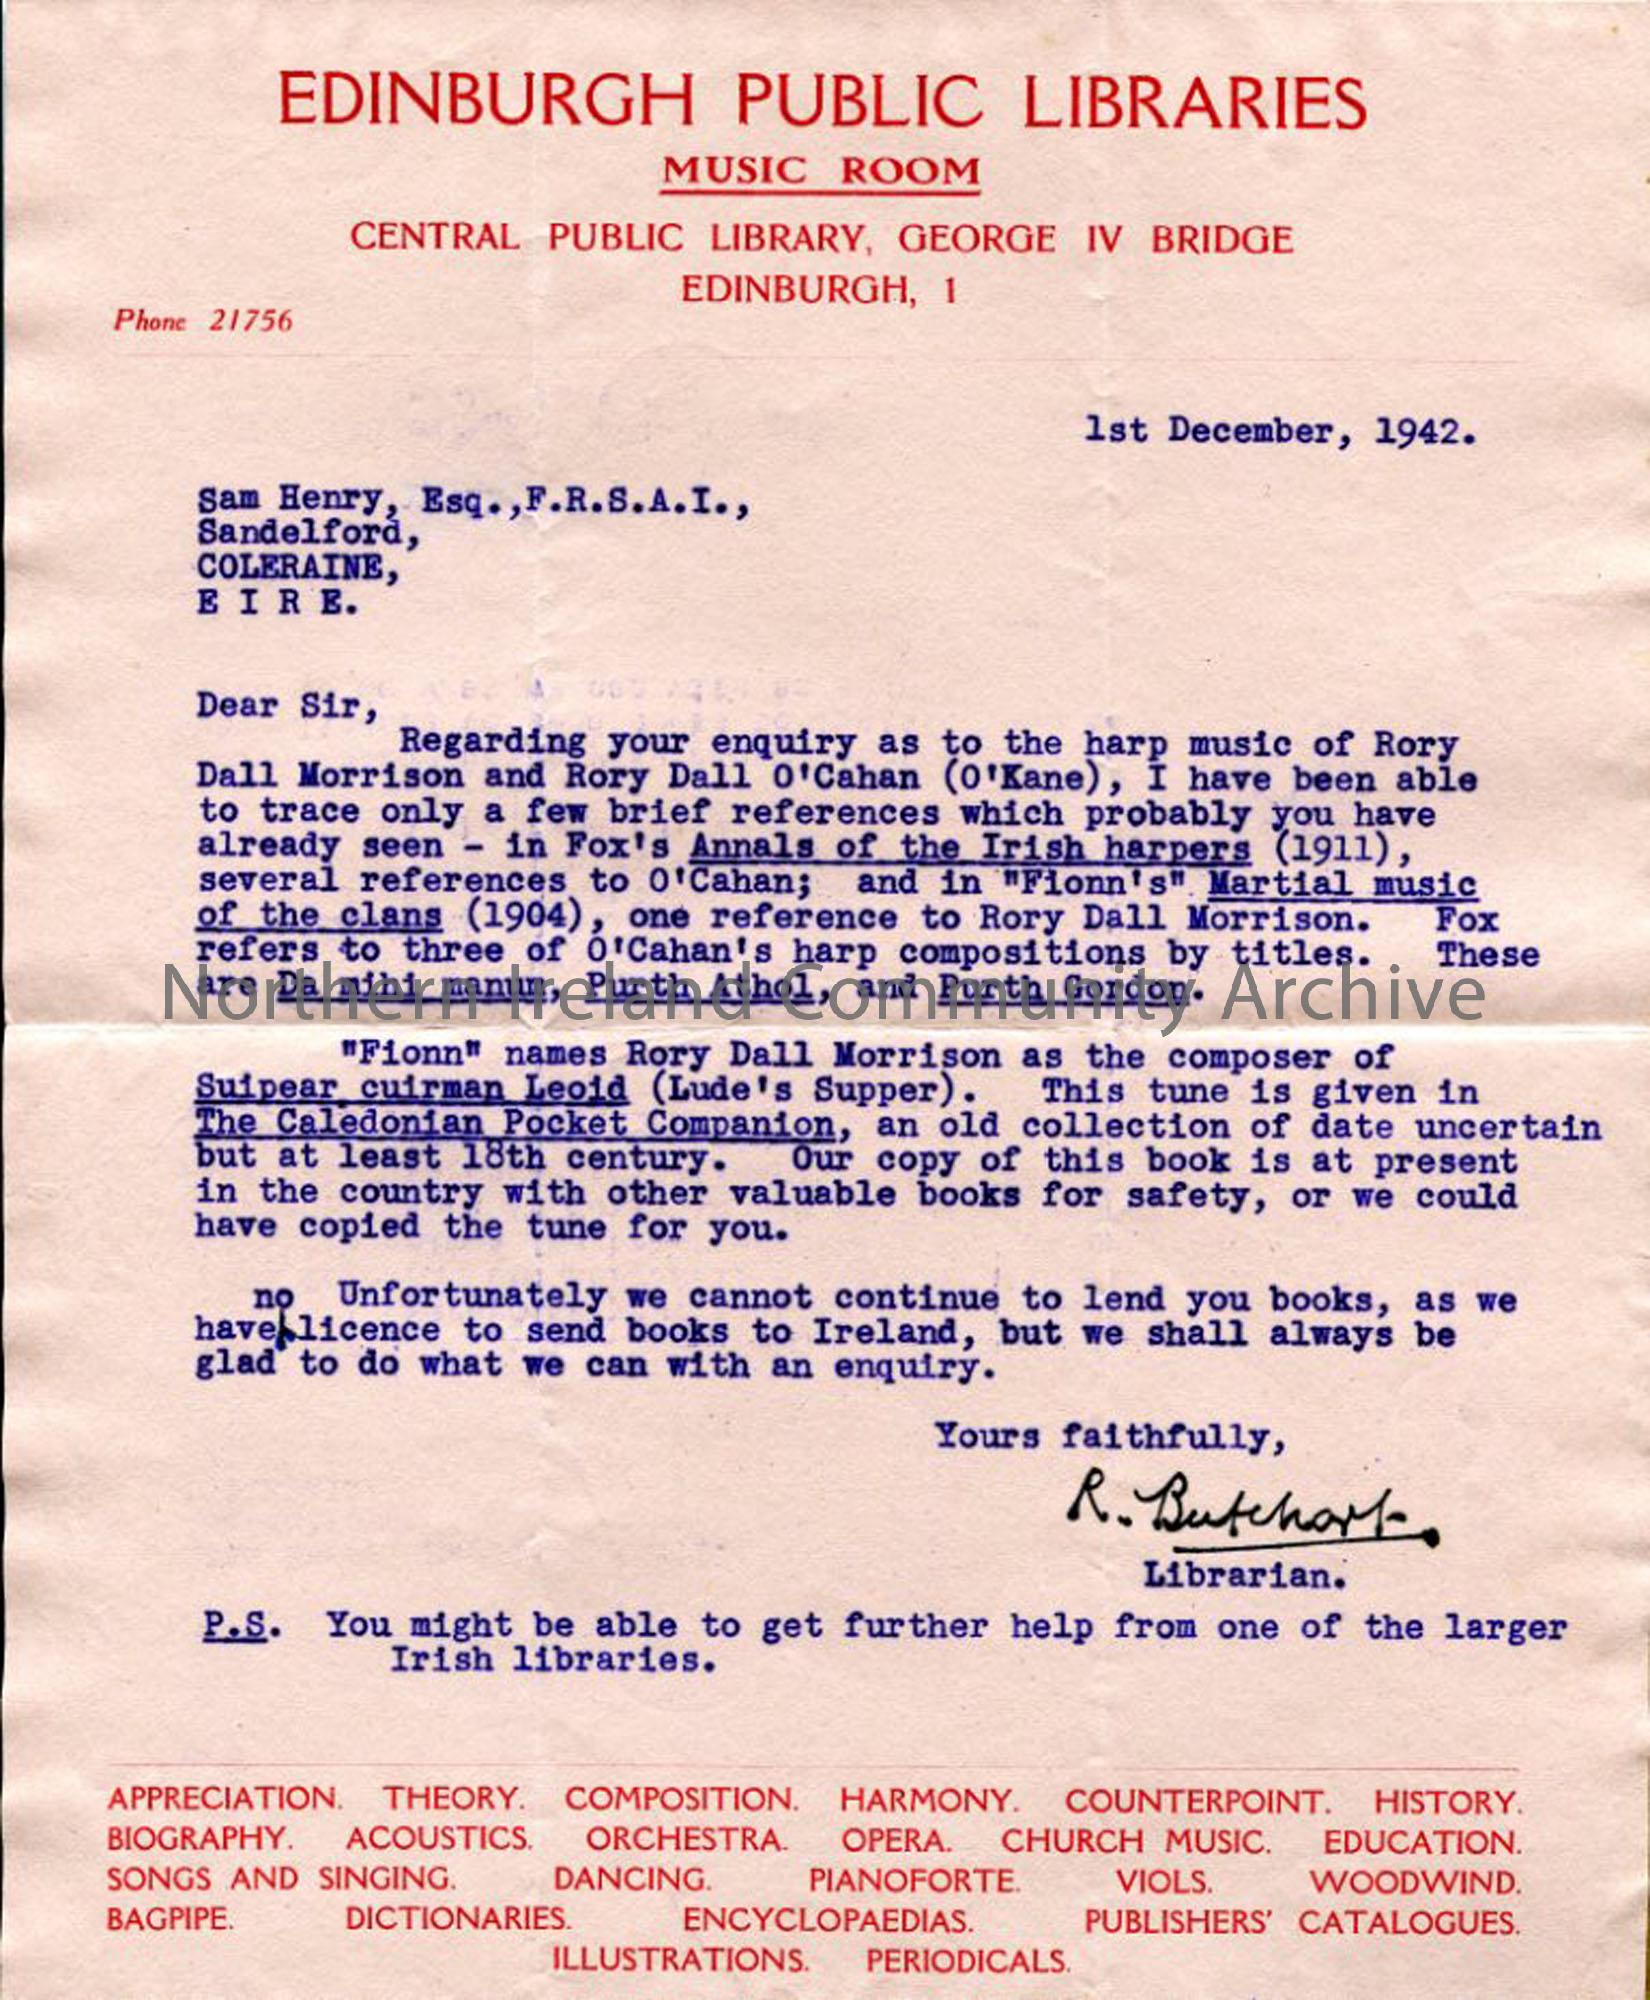 Typed letter from Edinburgh Public Libraries